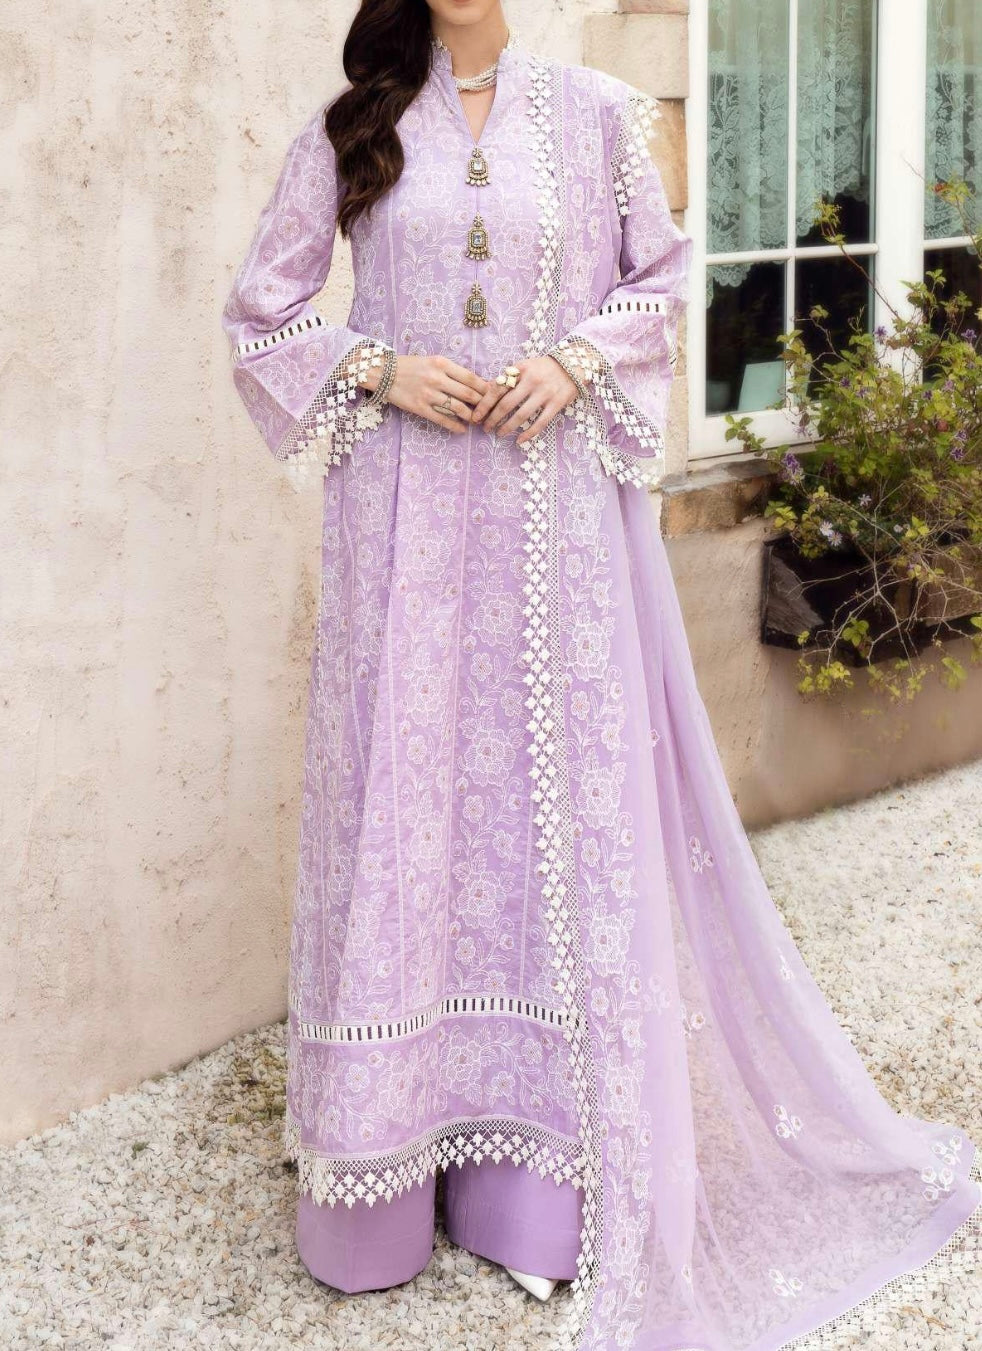 Grace S676-Embroidered 3pc lawn dress with Embroidered organza dupatta.